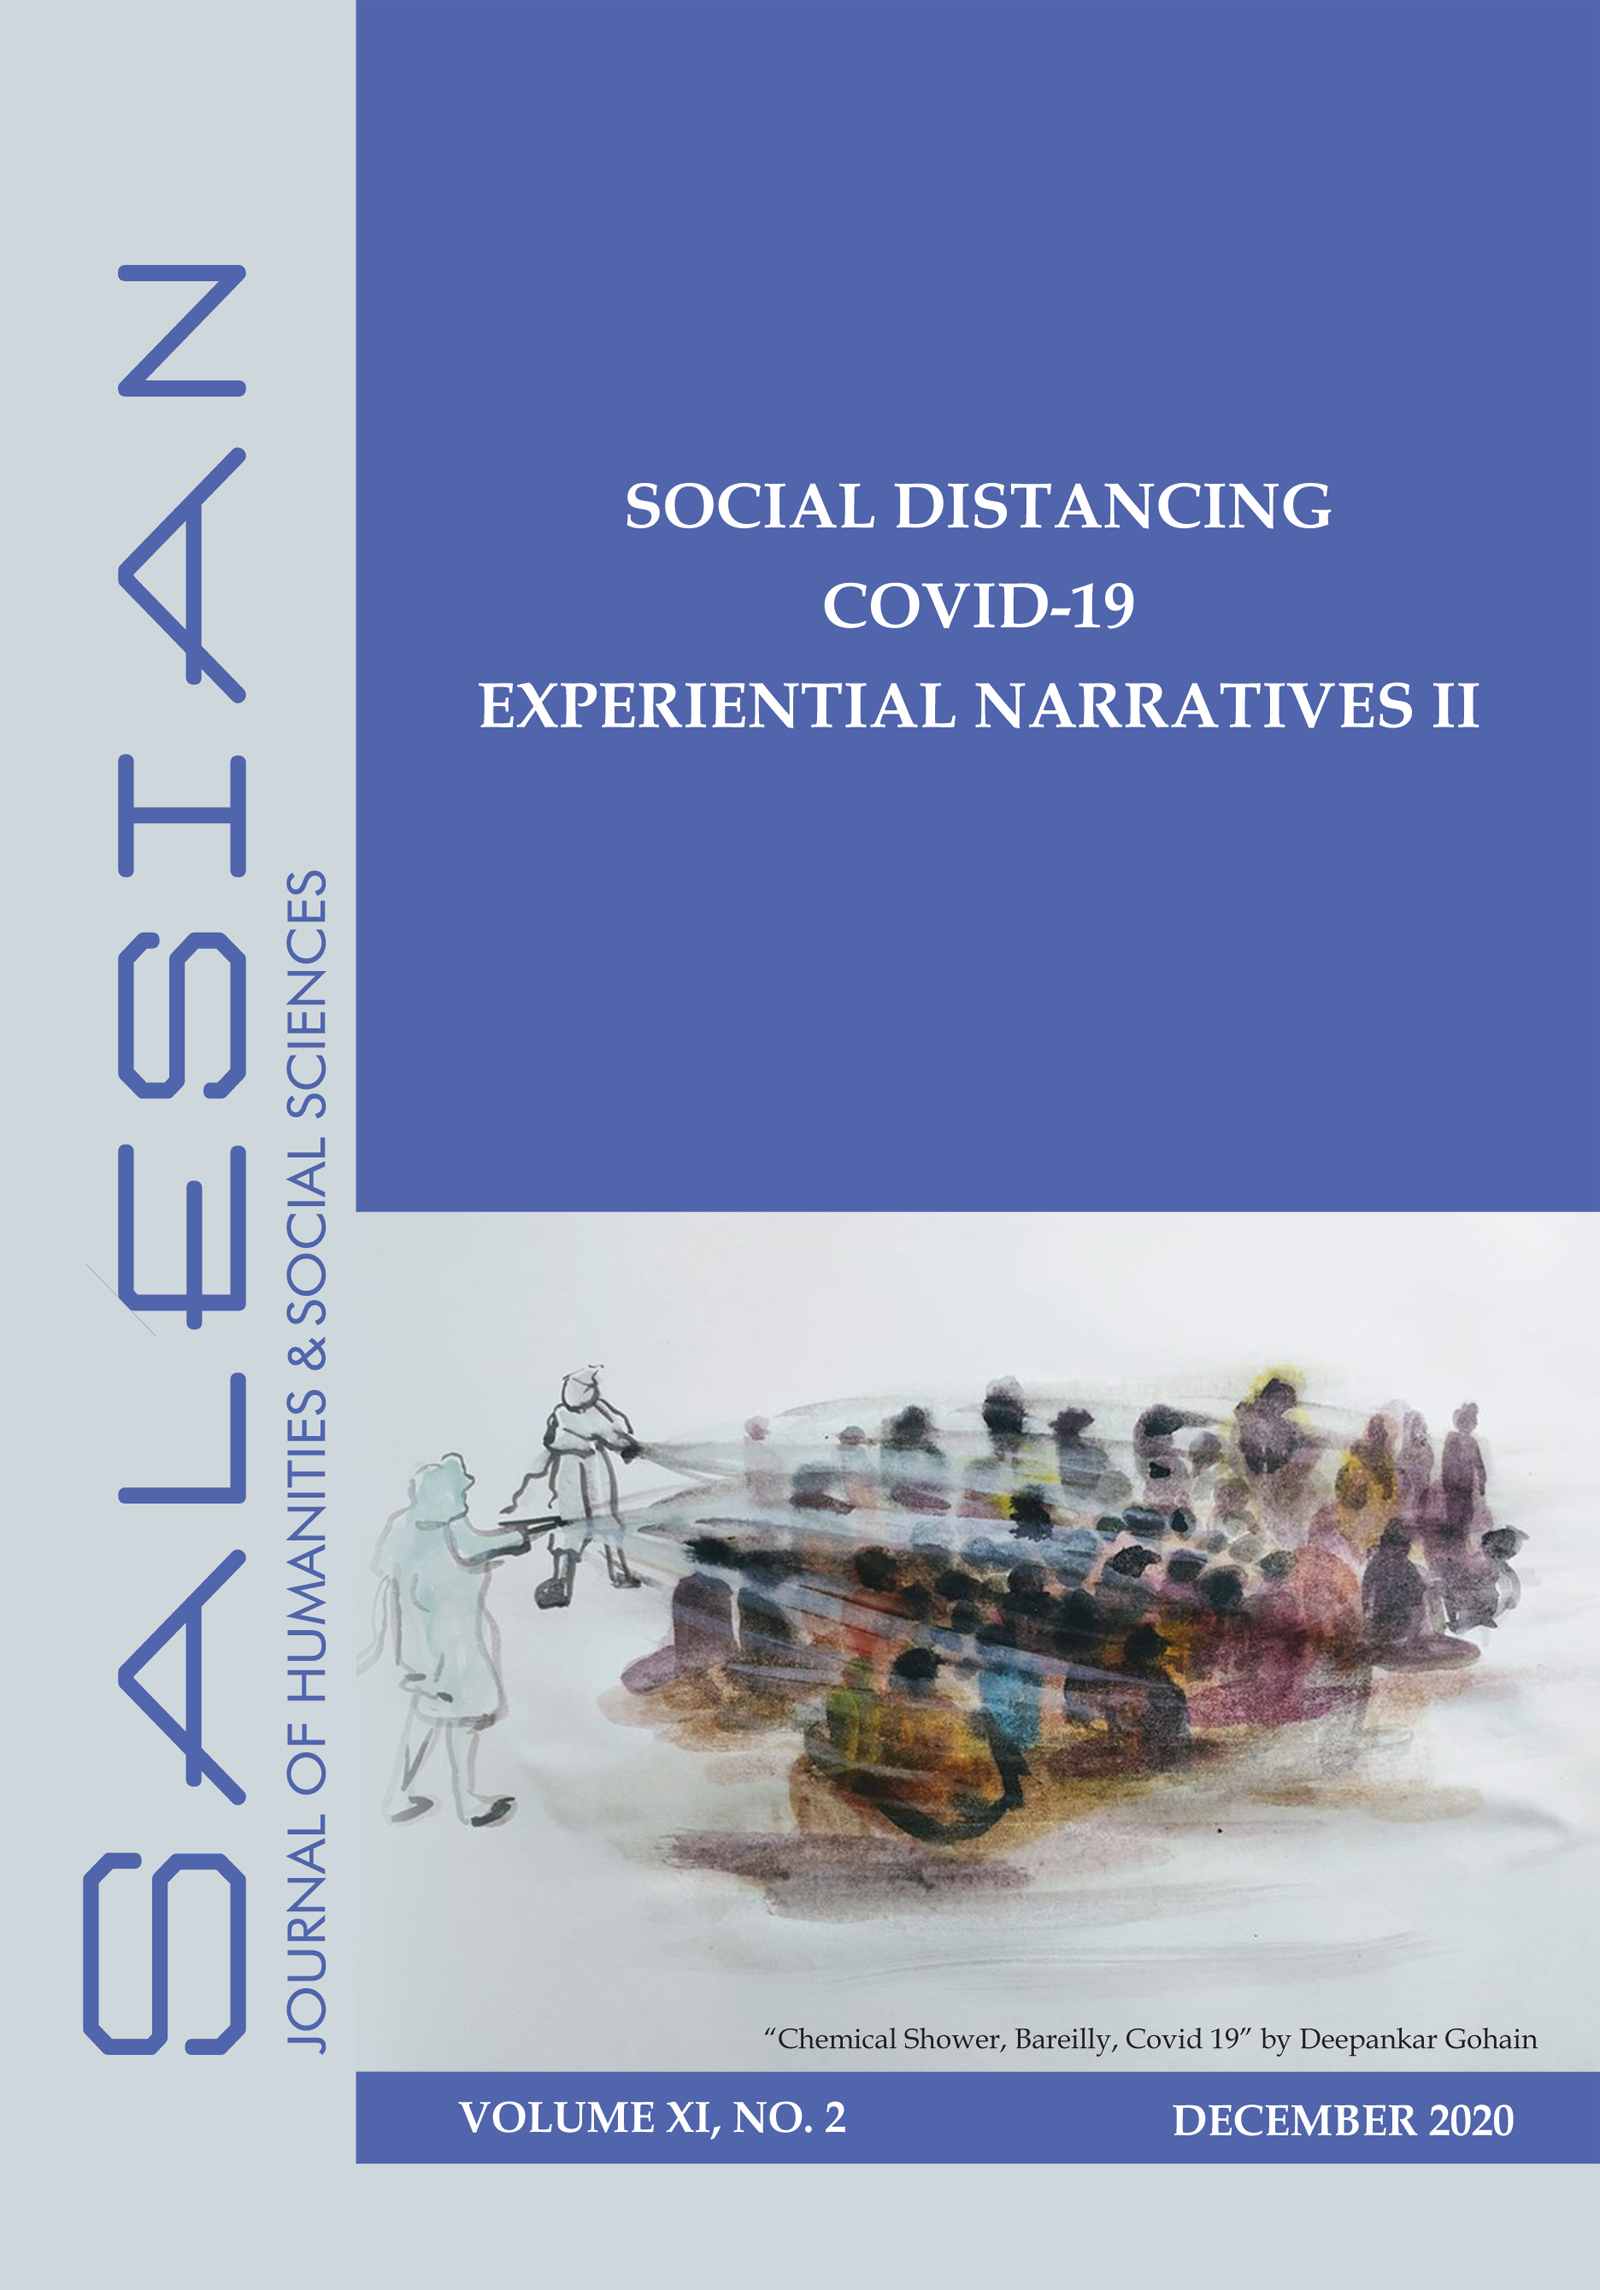 Social Distancing, COVID-19, and Experiential Narratives II